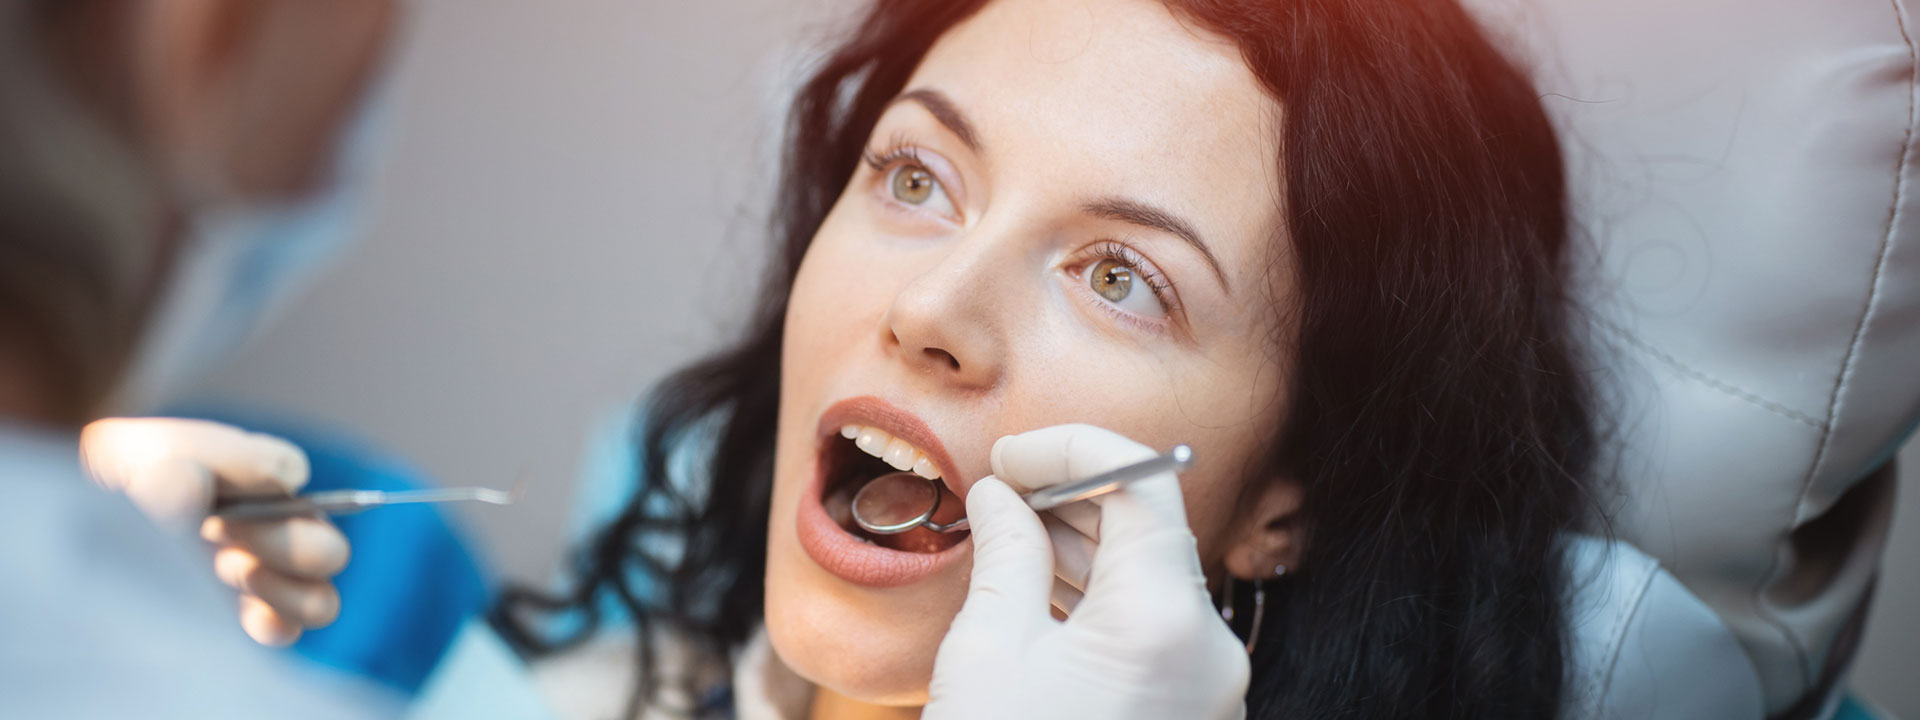 A woman is having dental check-up